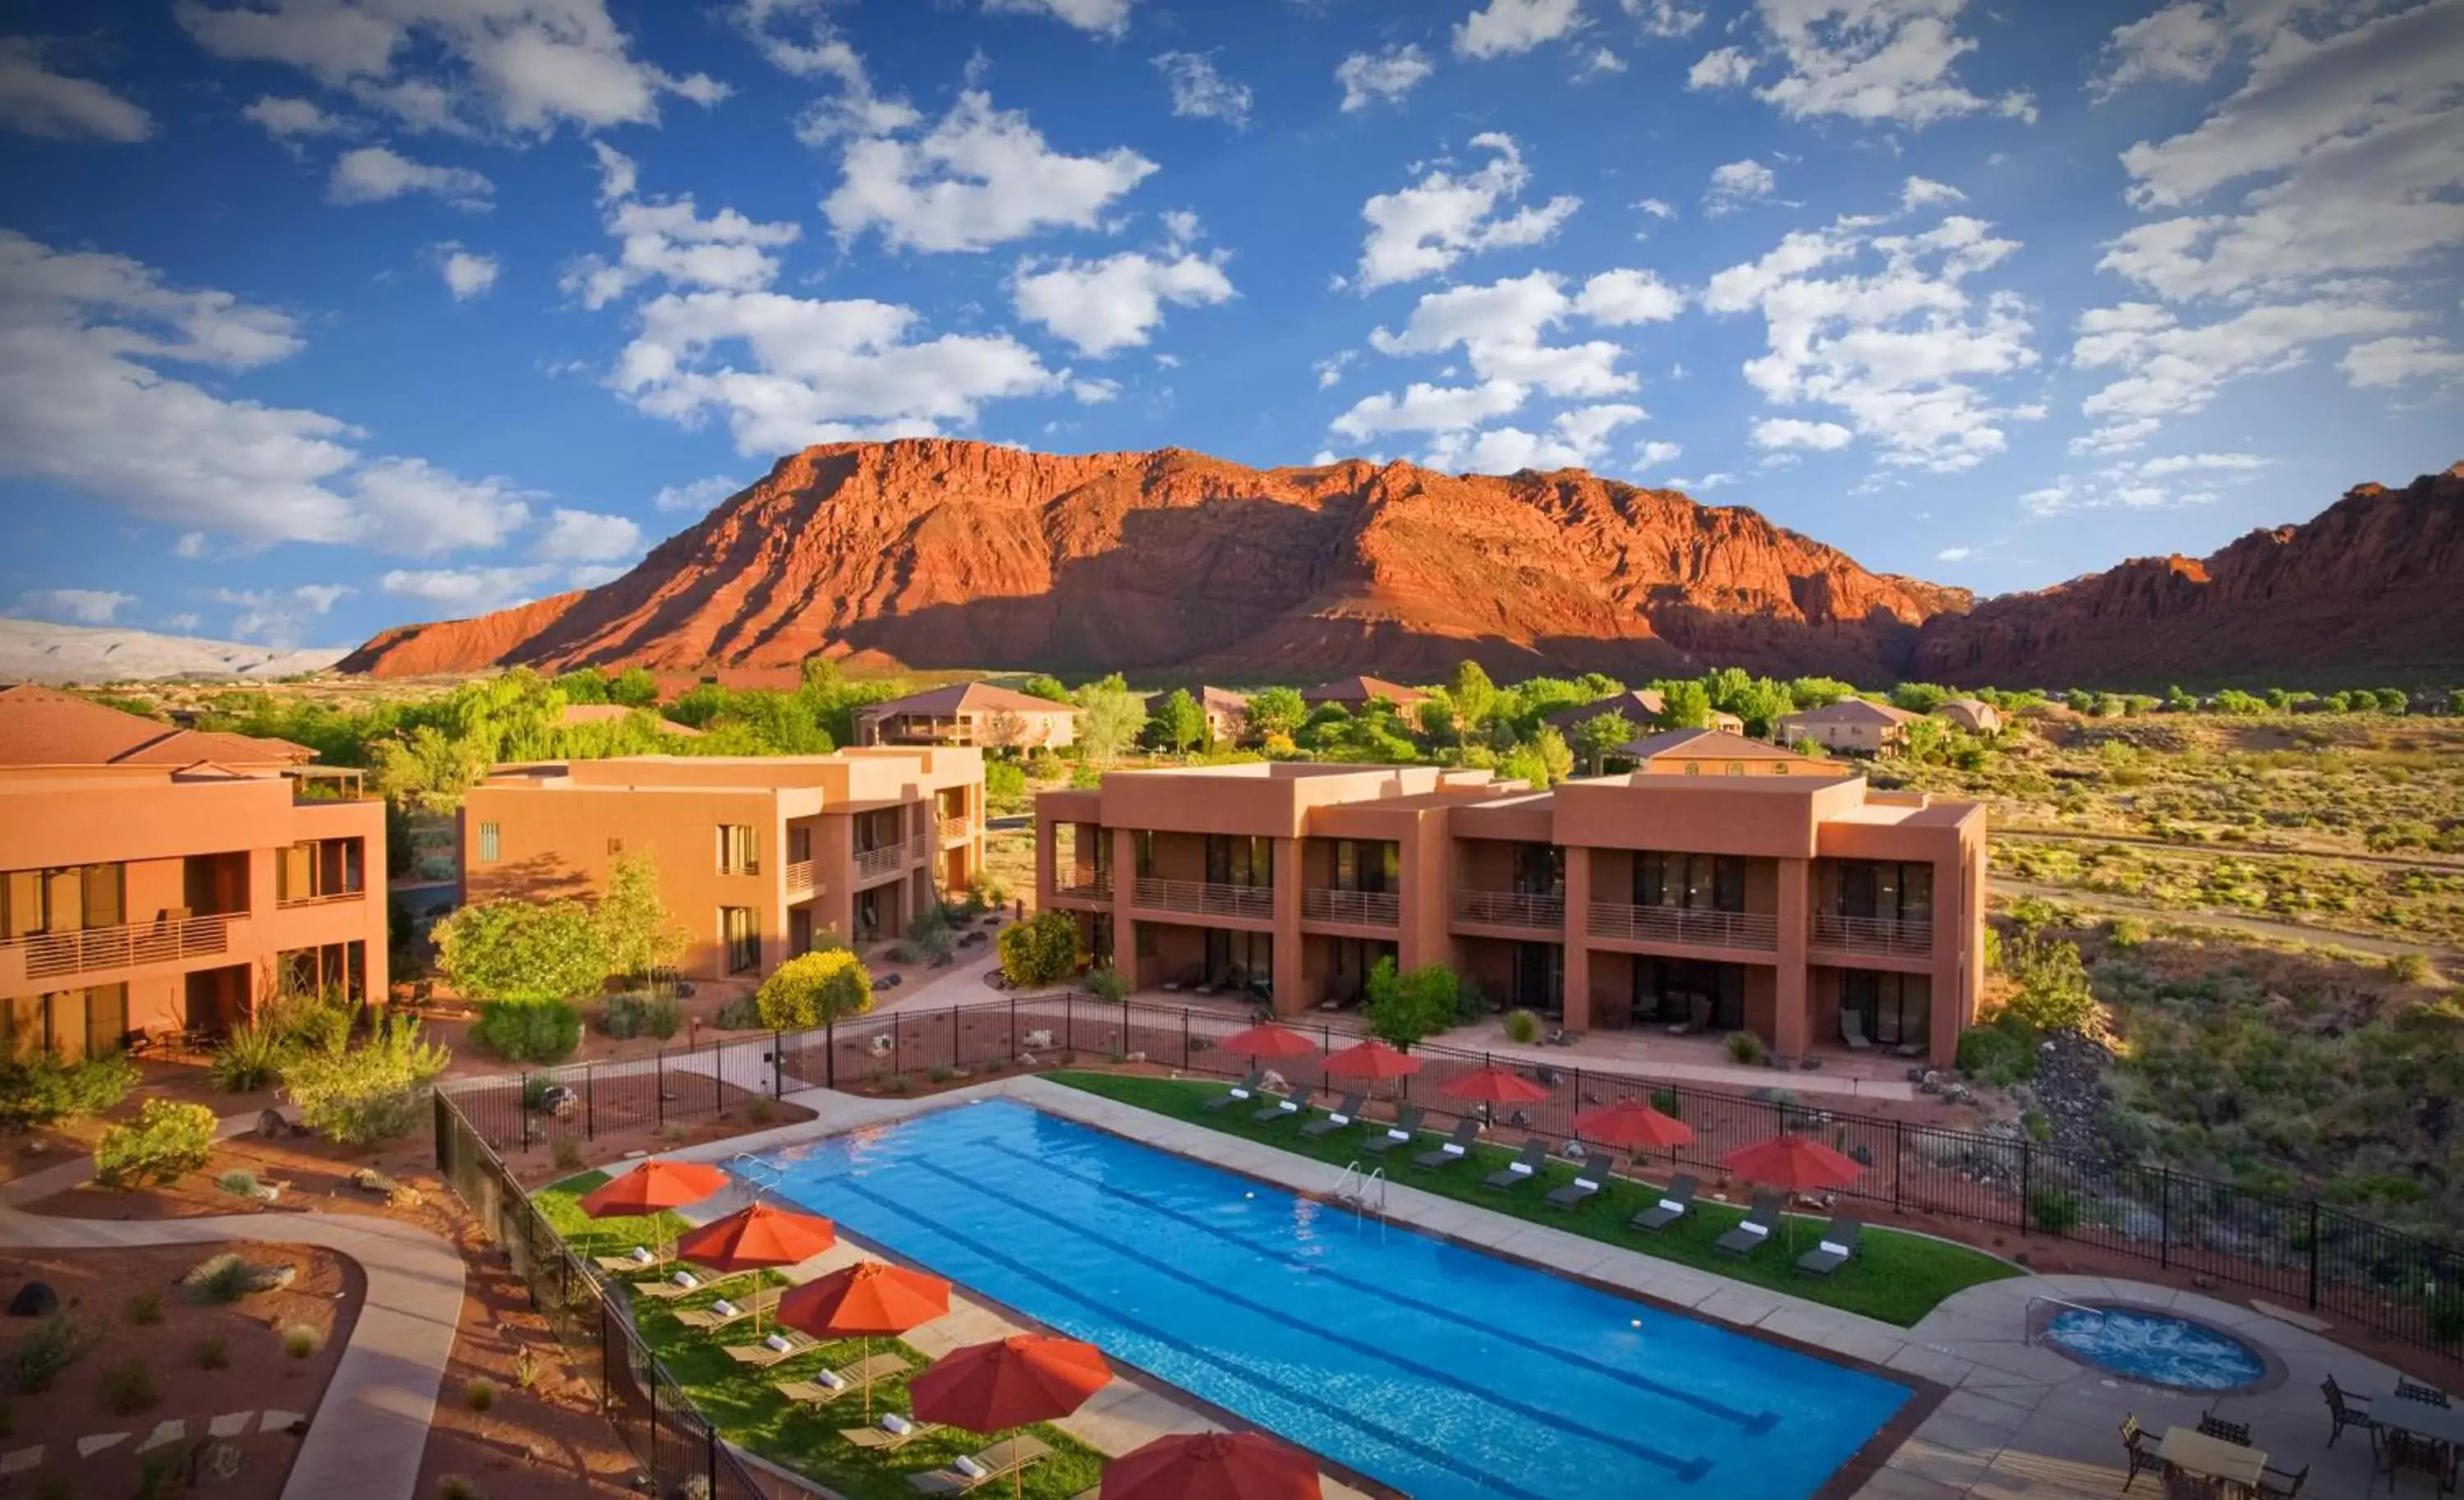 Pool View in Red Mountain Resort